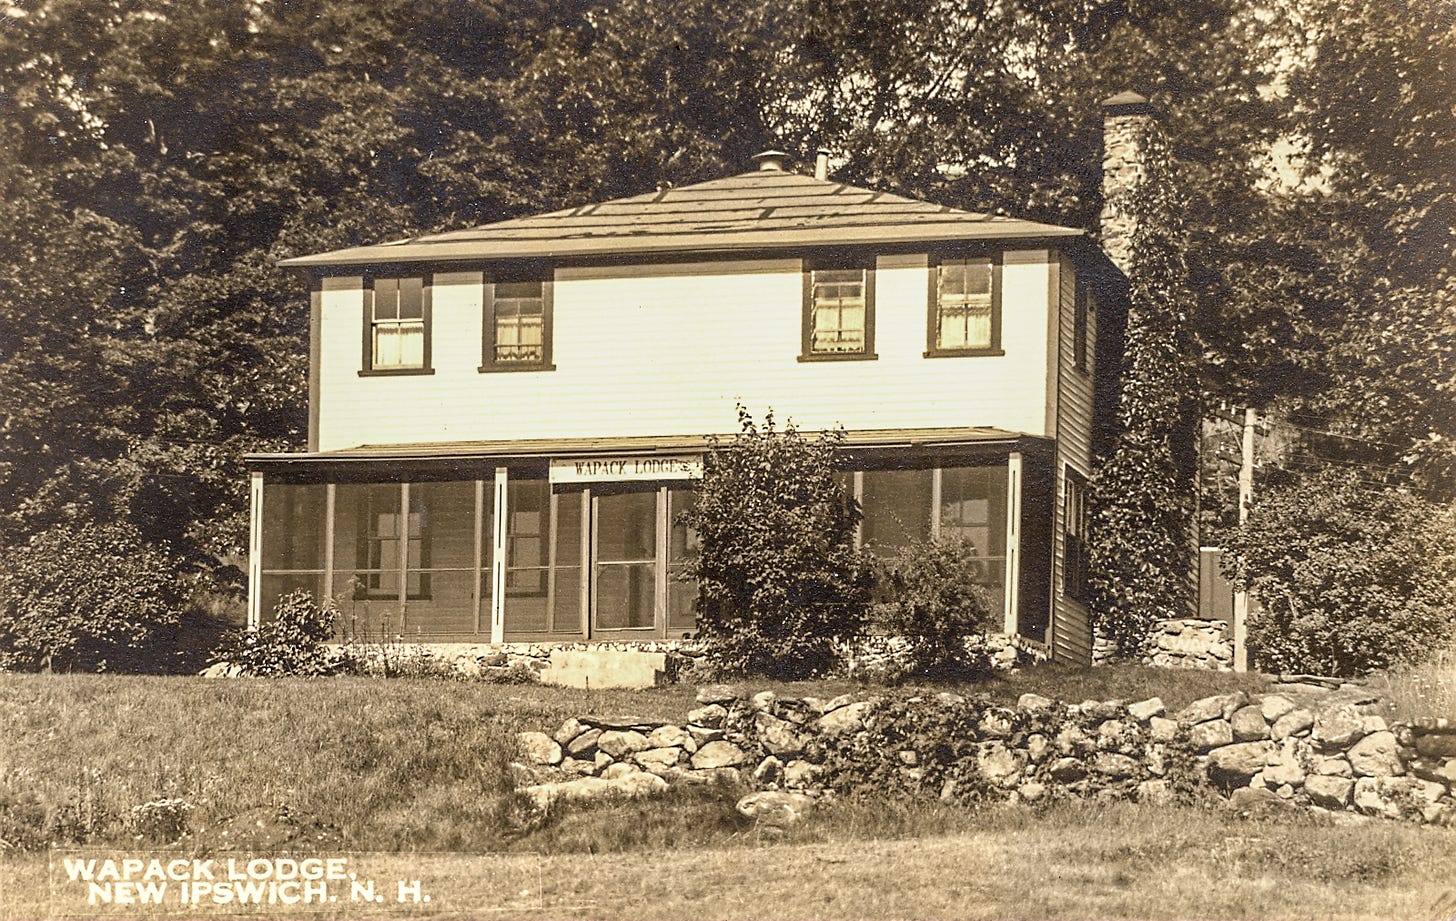 Wapack Lodge with second story